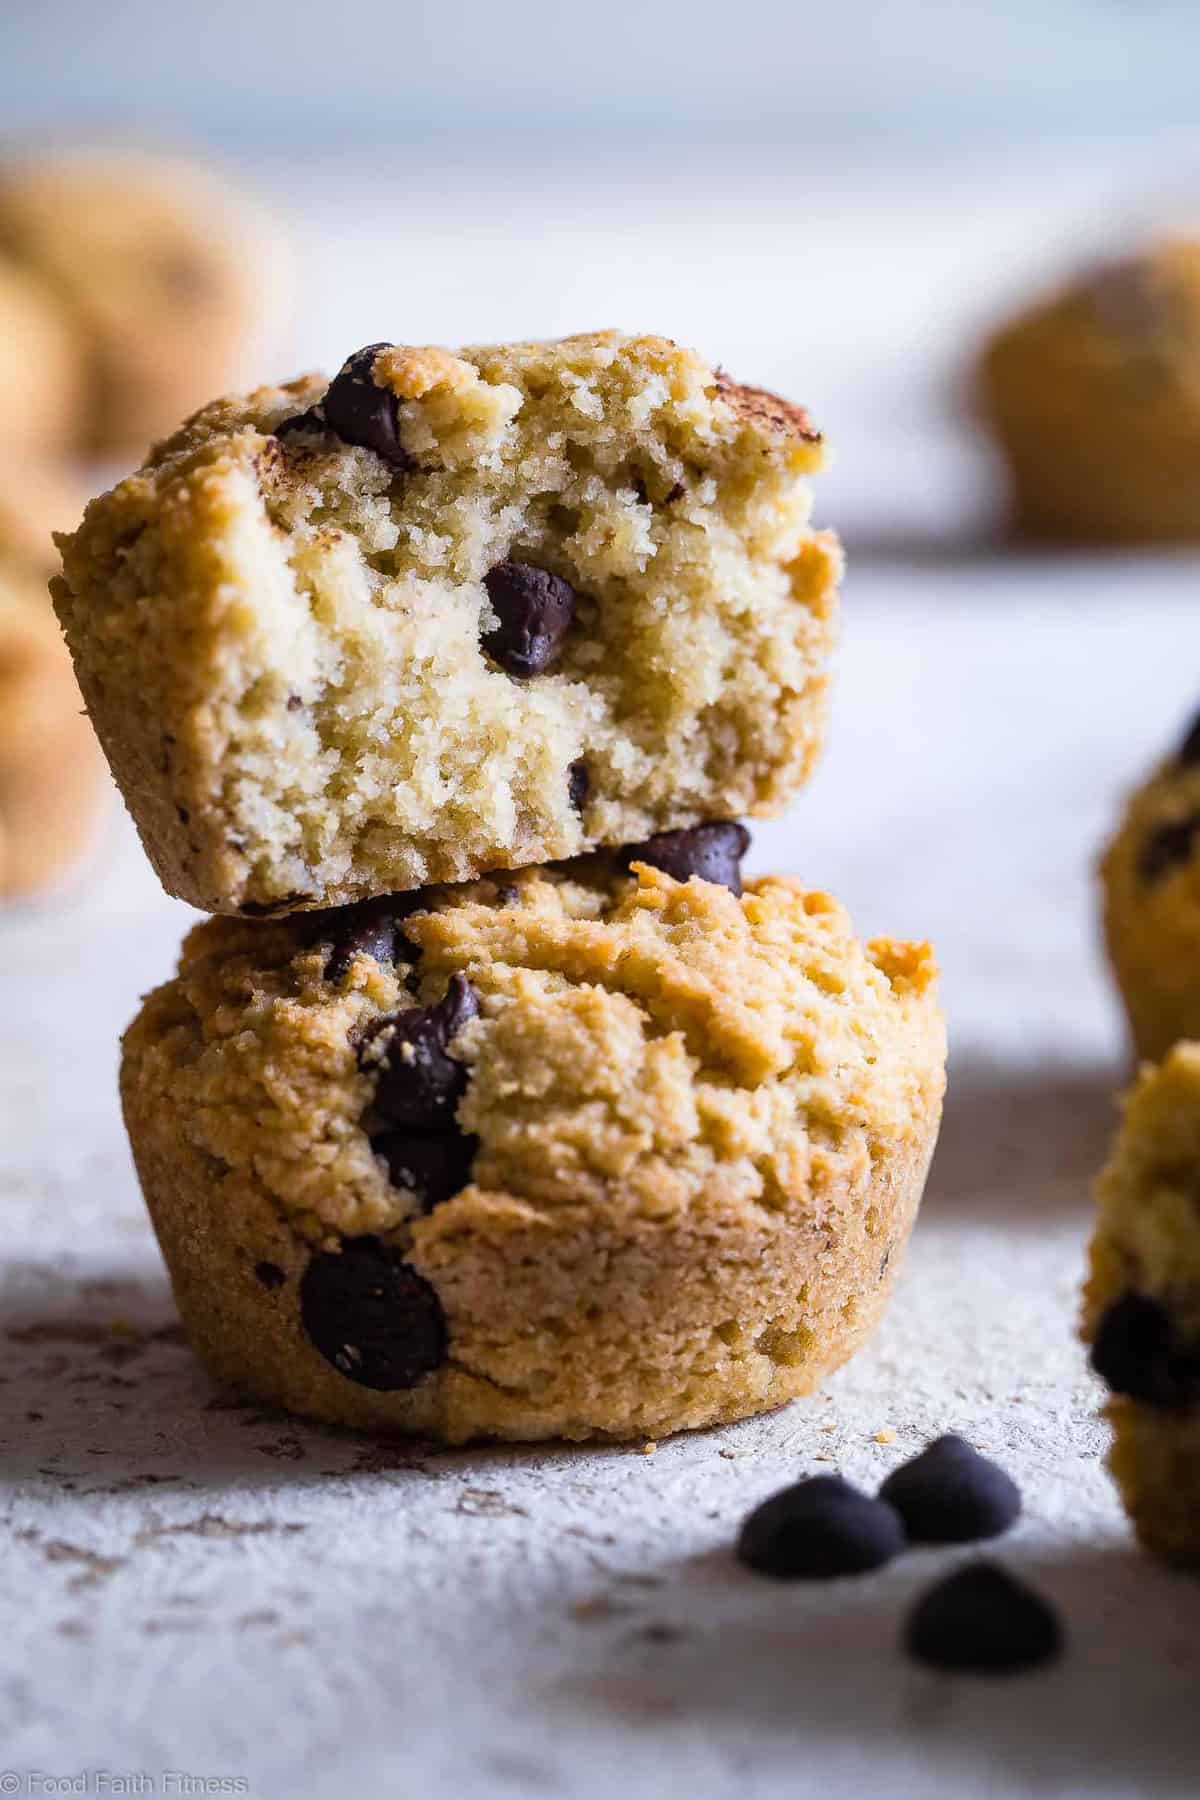 Walnut Chocolate Chip Keto Low Carb Muffins - These healthy, sugar free muffins are loaded with chocolate chips and black walnuts and are SO moist and fluffy you won't believe they're gluten free, keto AND paleo! | #Foodfaithfitness | #Keto #Lowcarb #Glutenfree #Paleo #Grainfree